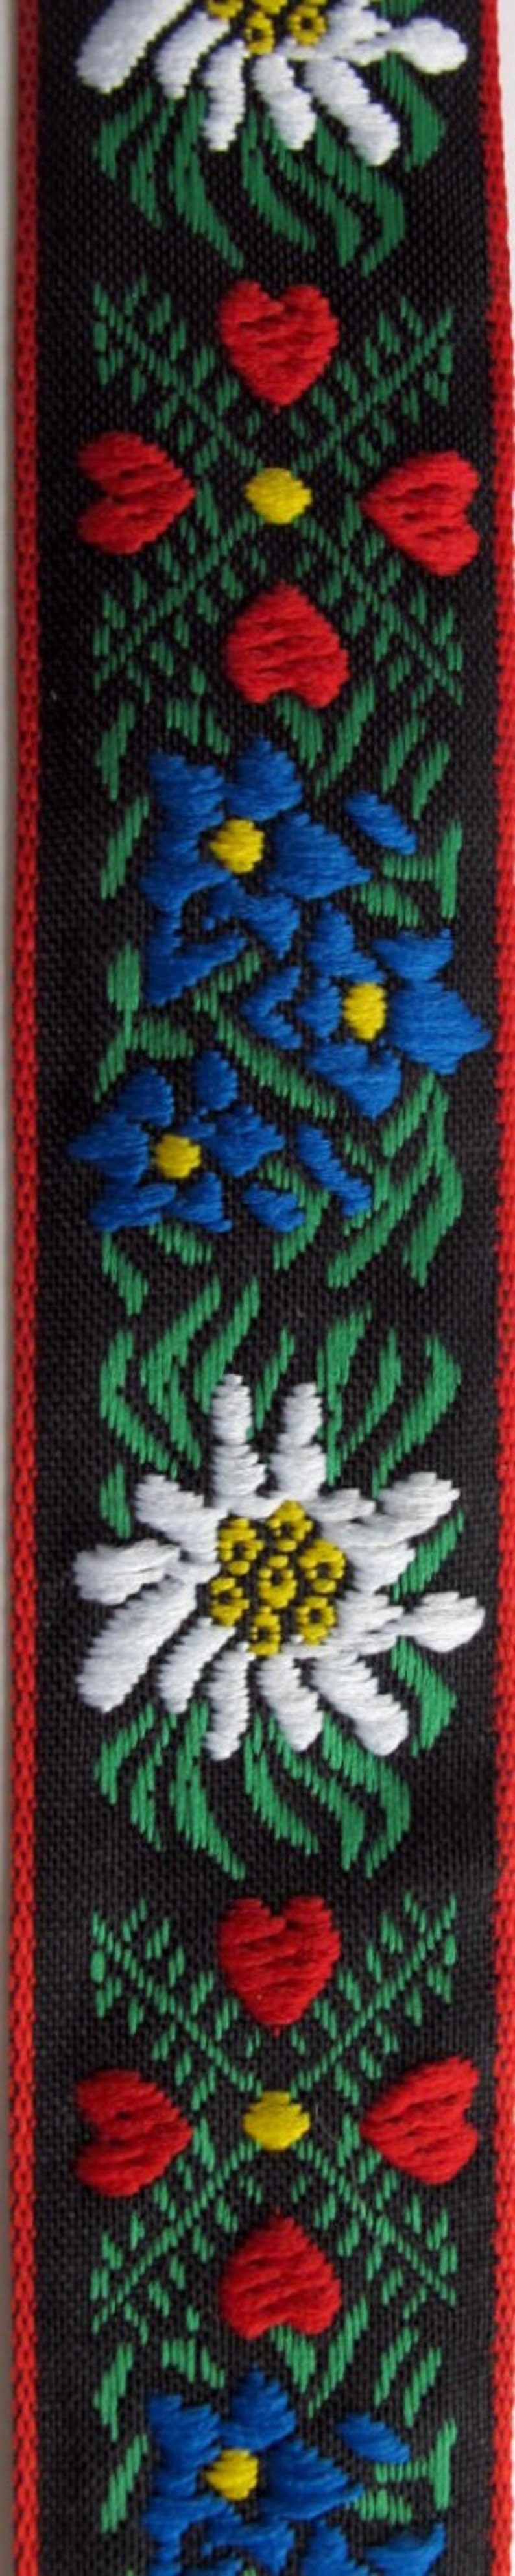 jacquard trim with white edelweiss flowers, blue flowers, green leaves and four red hearts, on black with red woven edges, bavarian trim